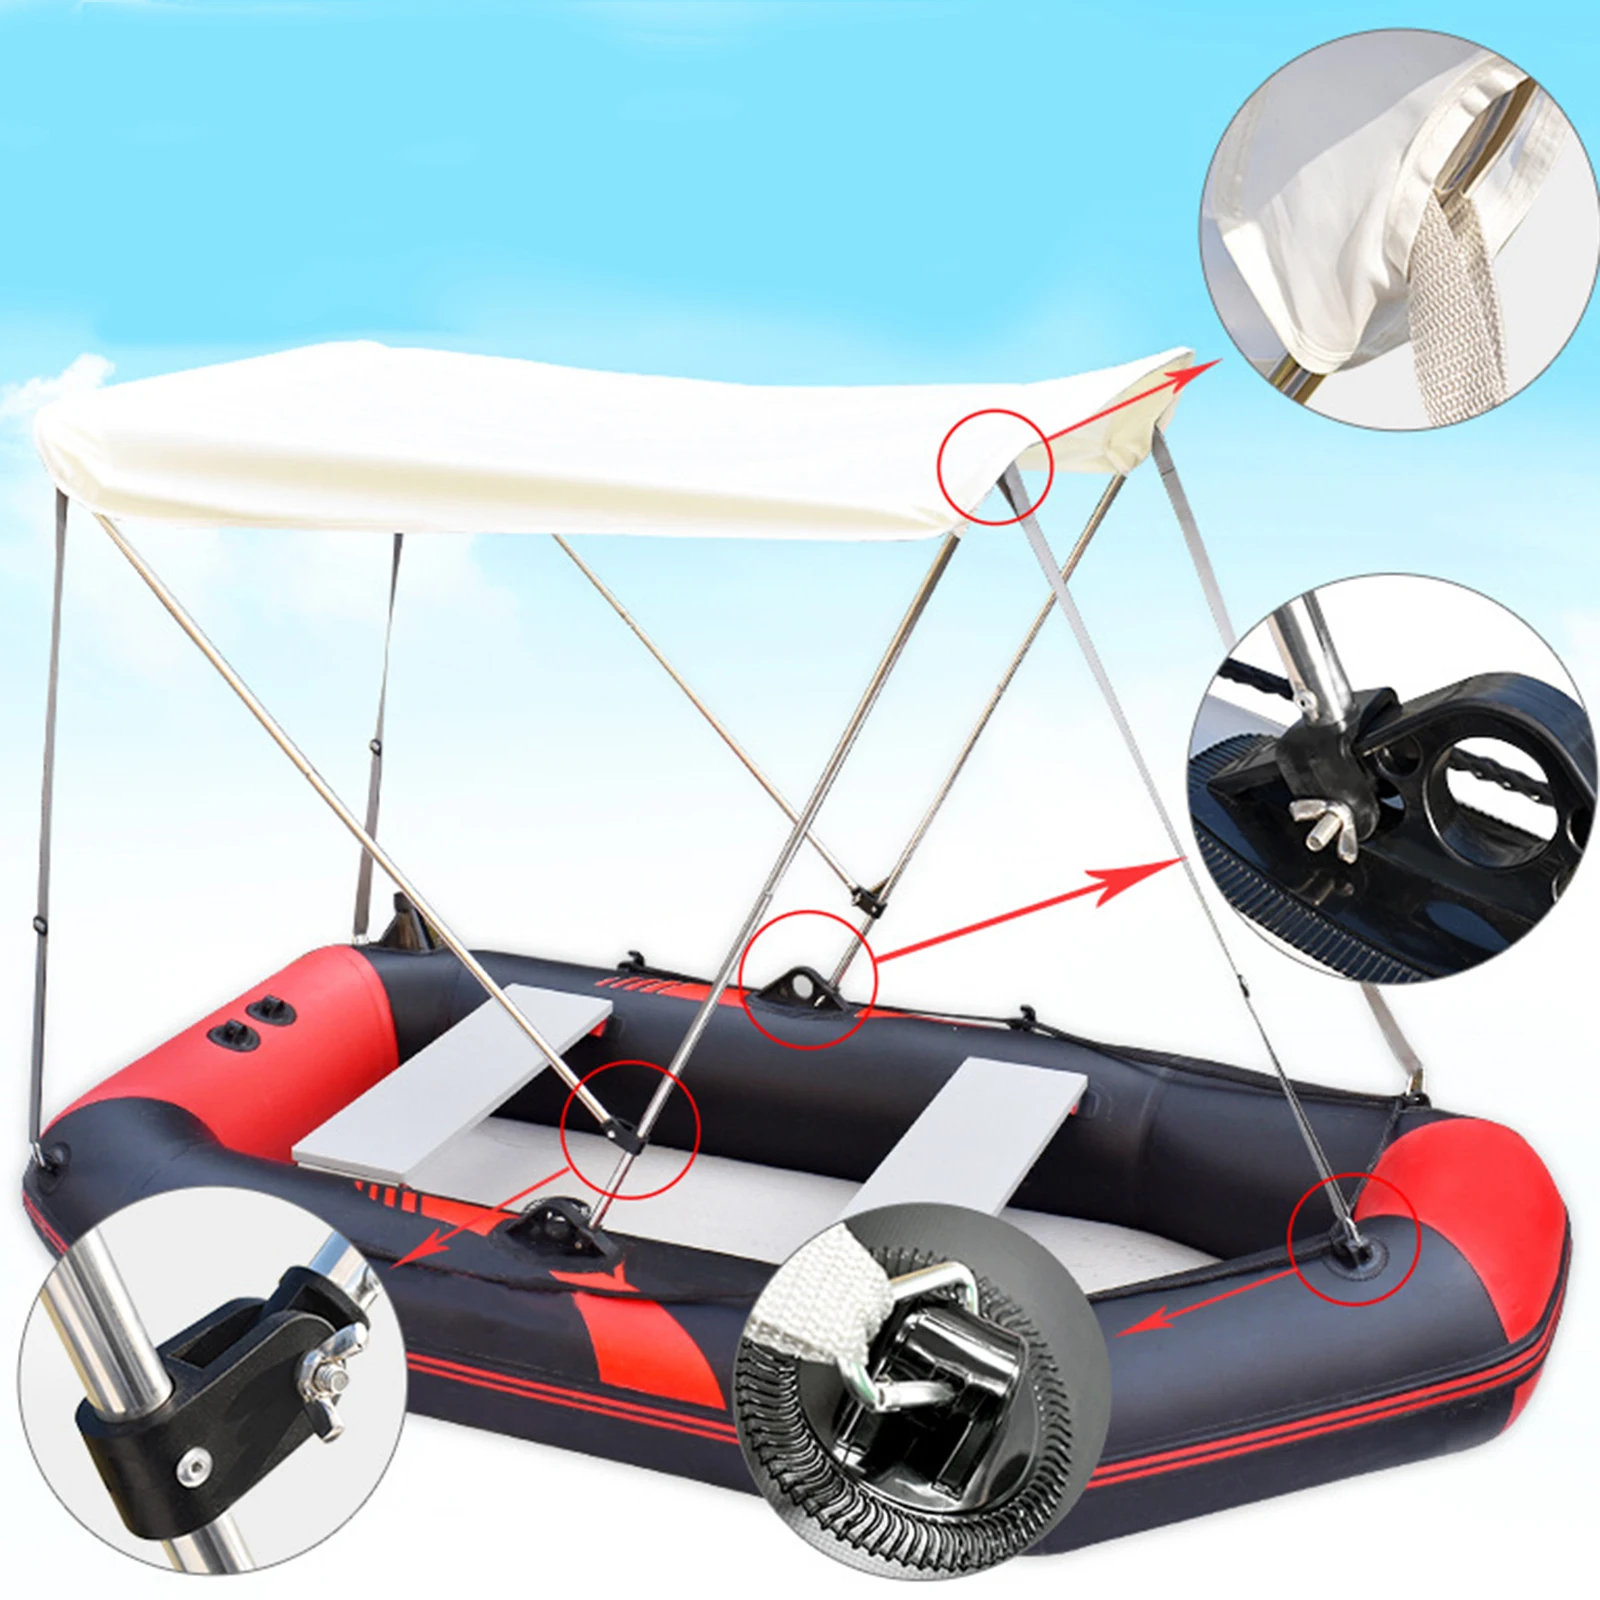 Foldable Inflatable Boat Canopy Kayak Sun Shelter Sailboat Awning Cover Tent Sunshade Foldable Dinghy Canoe UV Protect Top Cover